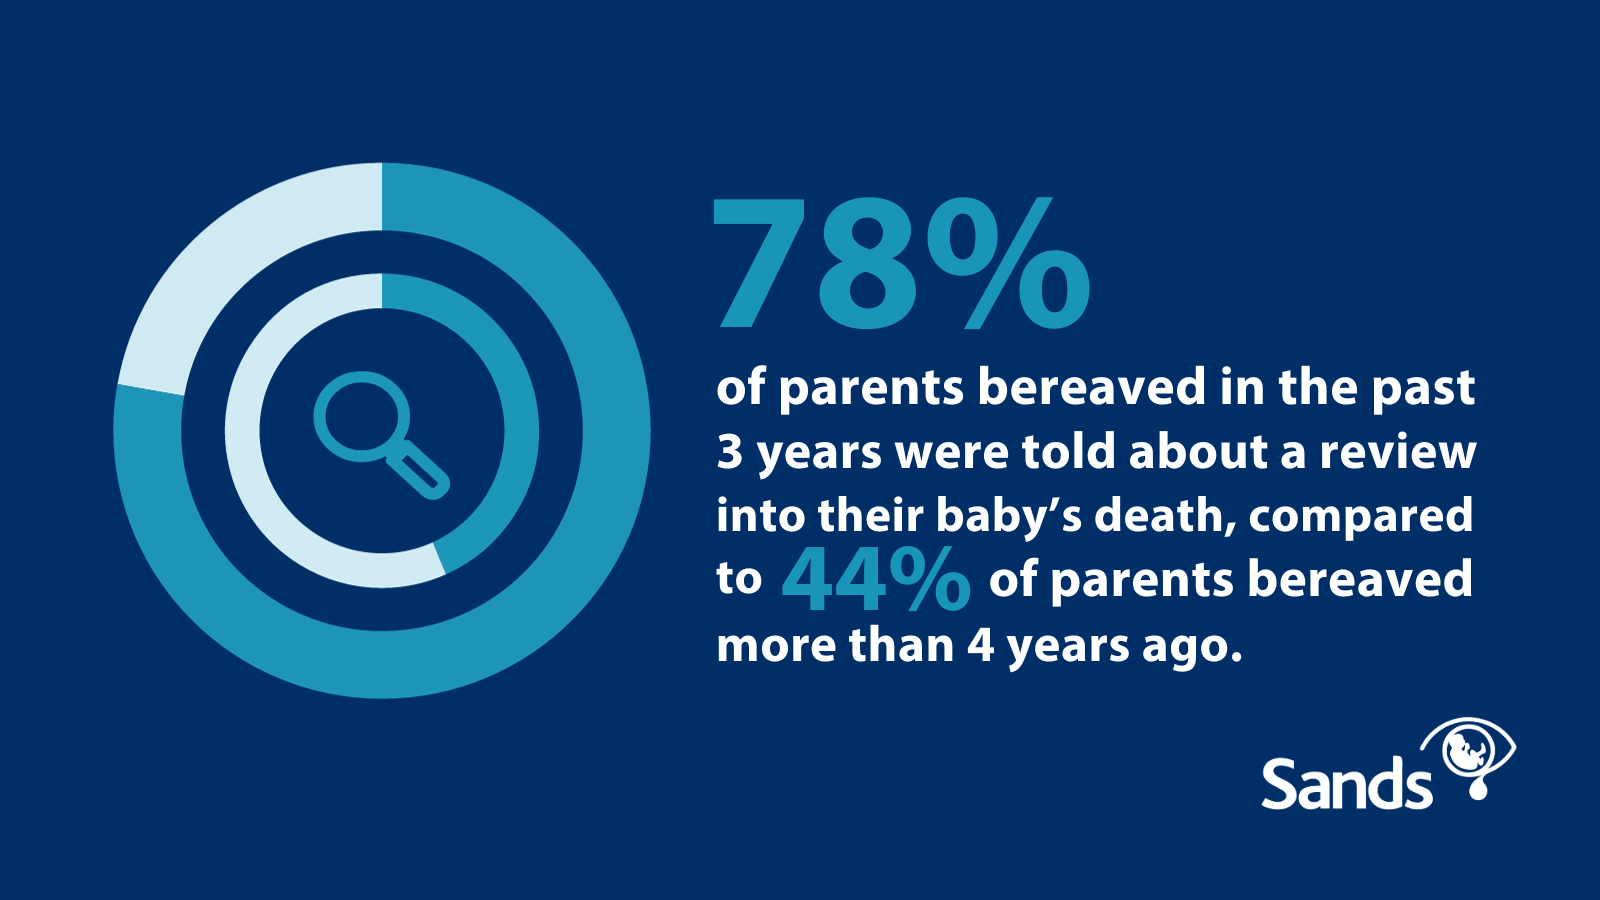 Image with text 78% of parents in the past 3 years were told about a review into their baby's death, compared to 44% of parents bereaved more than 4 years ago